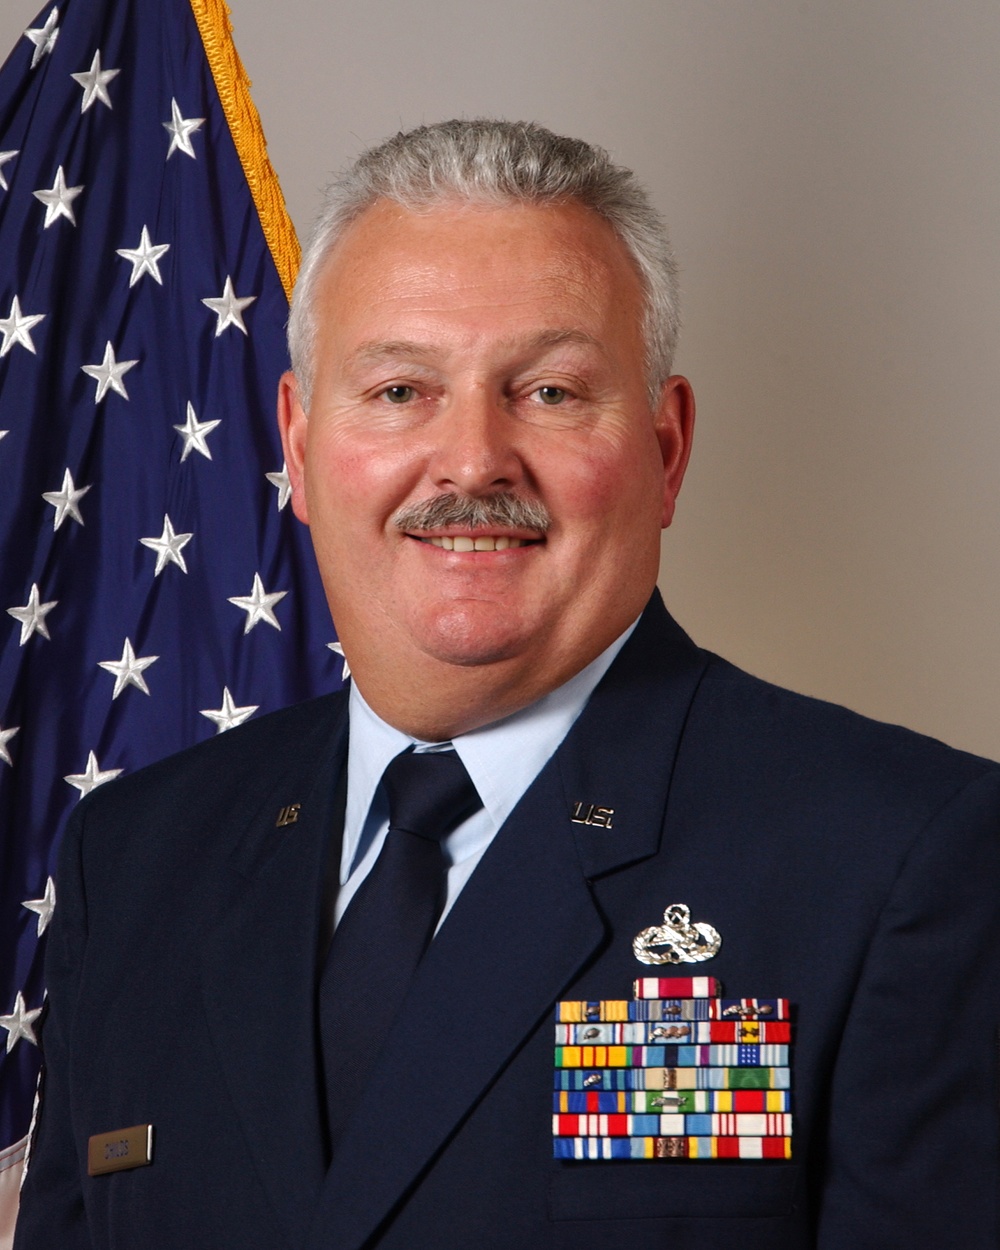 North Dakota Air National Guard selects new Wing Command Chief